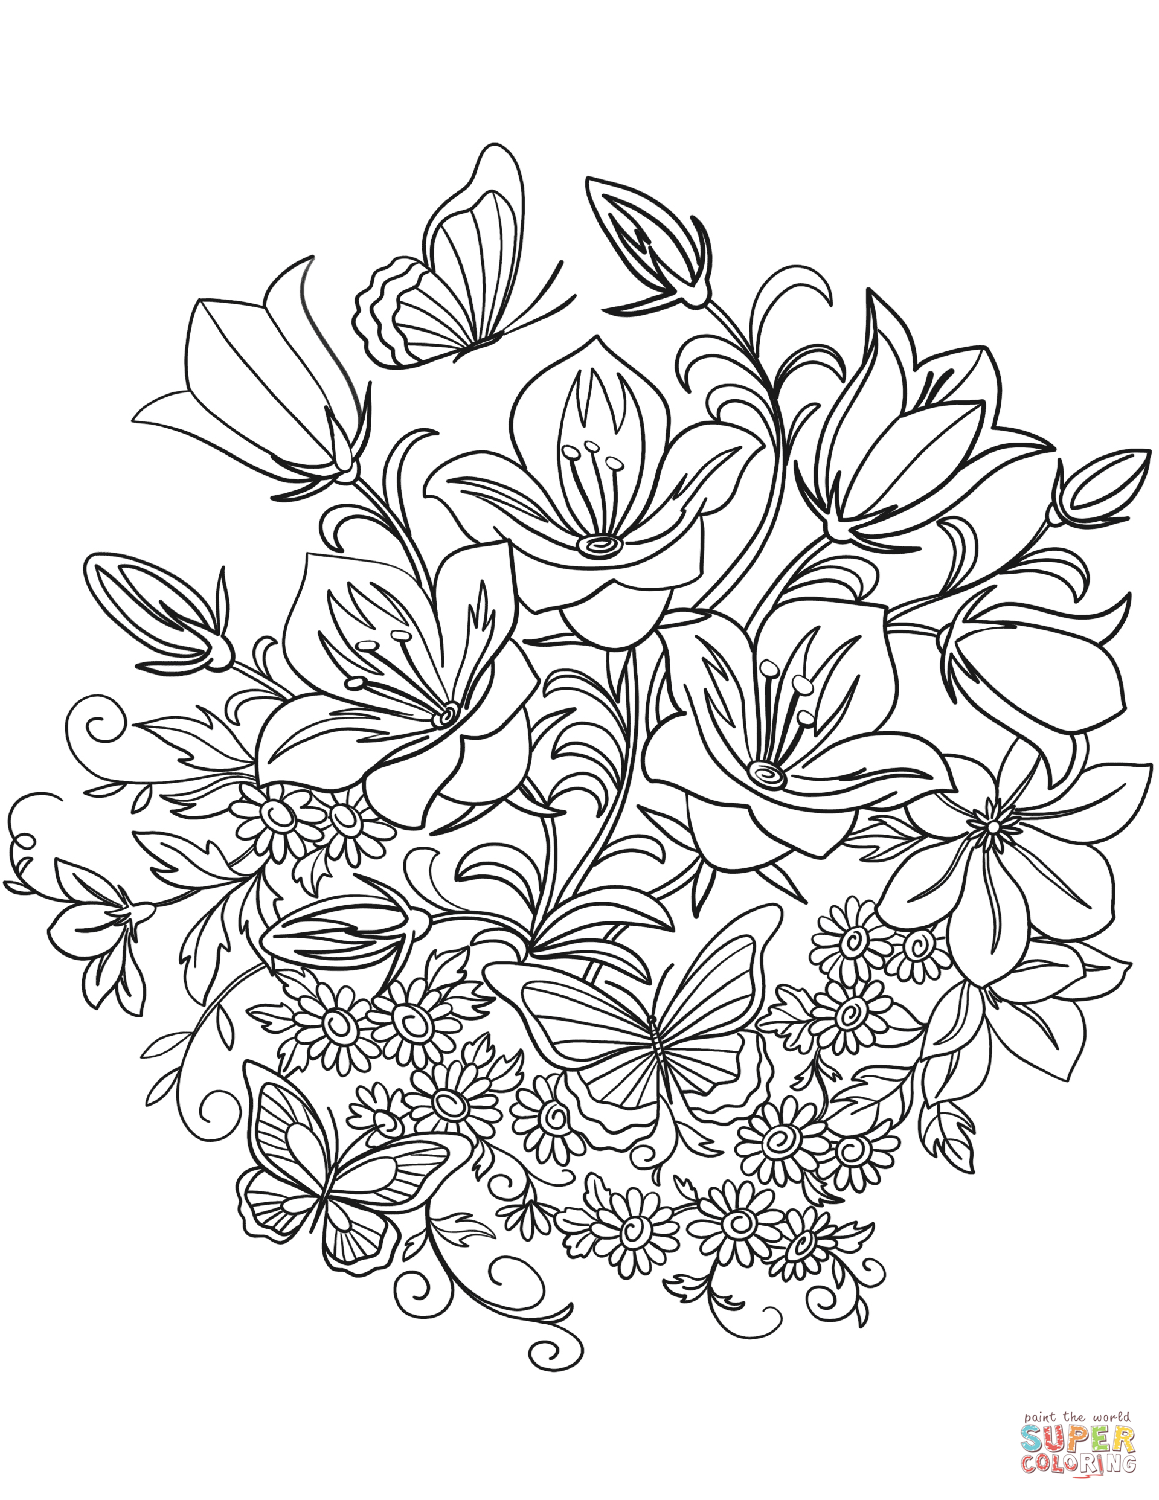 Butterfly and Flowers coloring page | Free Printable Coloring Pages